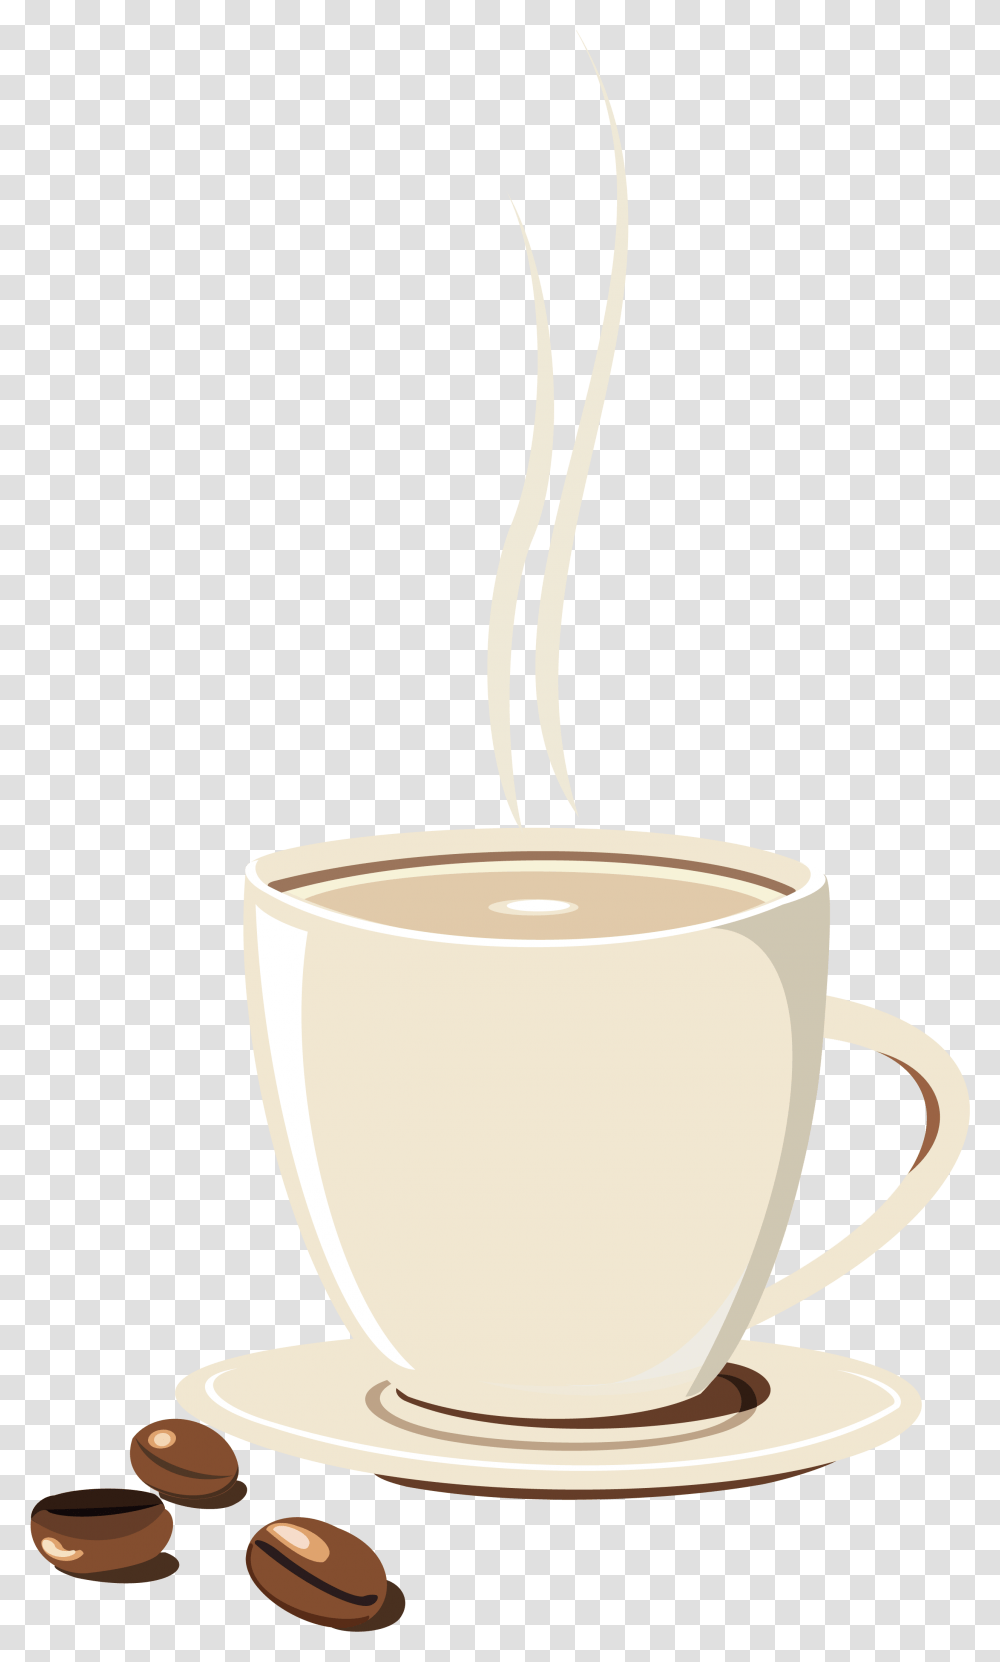 Coffee Cup Clipart Coffee Vector Illustrations Coffee, Latte, Beverage, Drink, Lamp Transparent Png